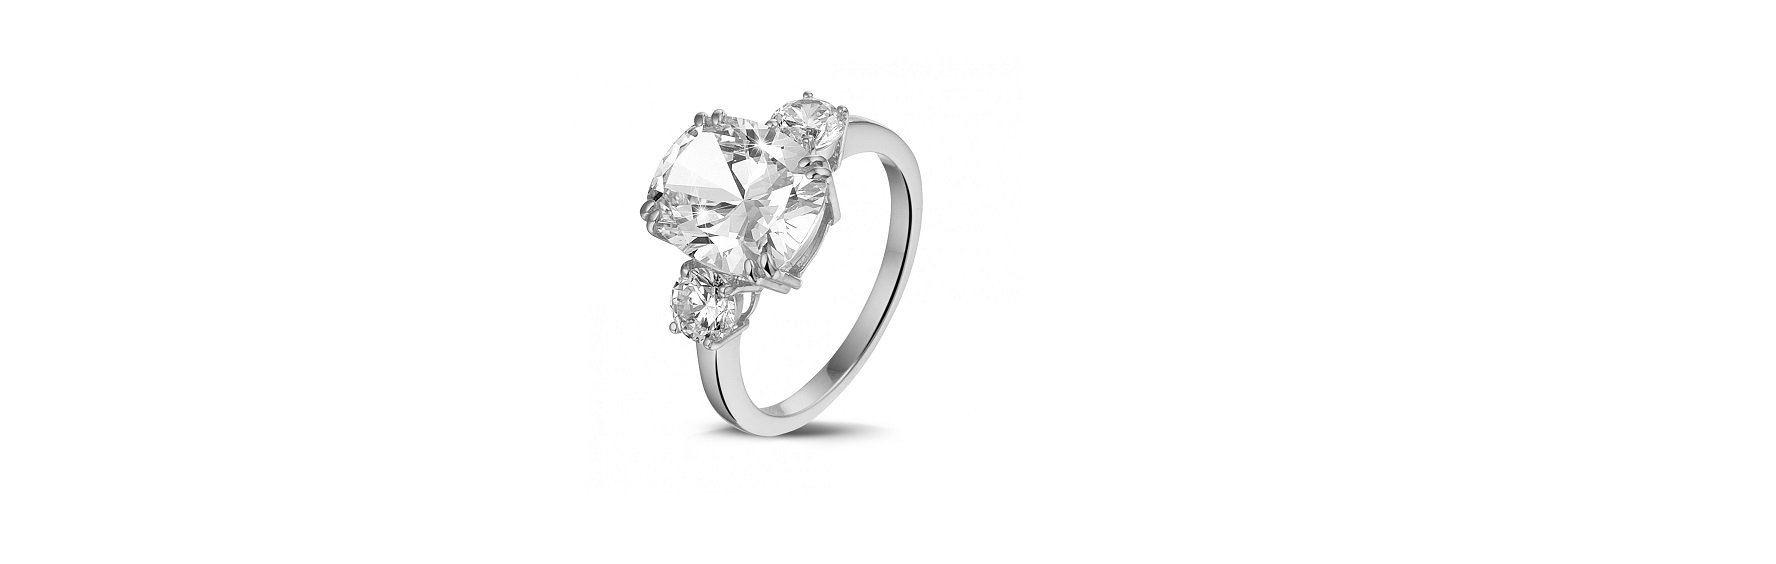 Choose an Engagement Ring with a 4-Carat Diamond